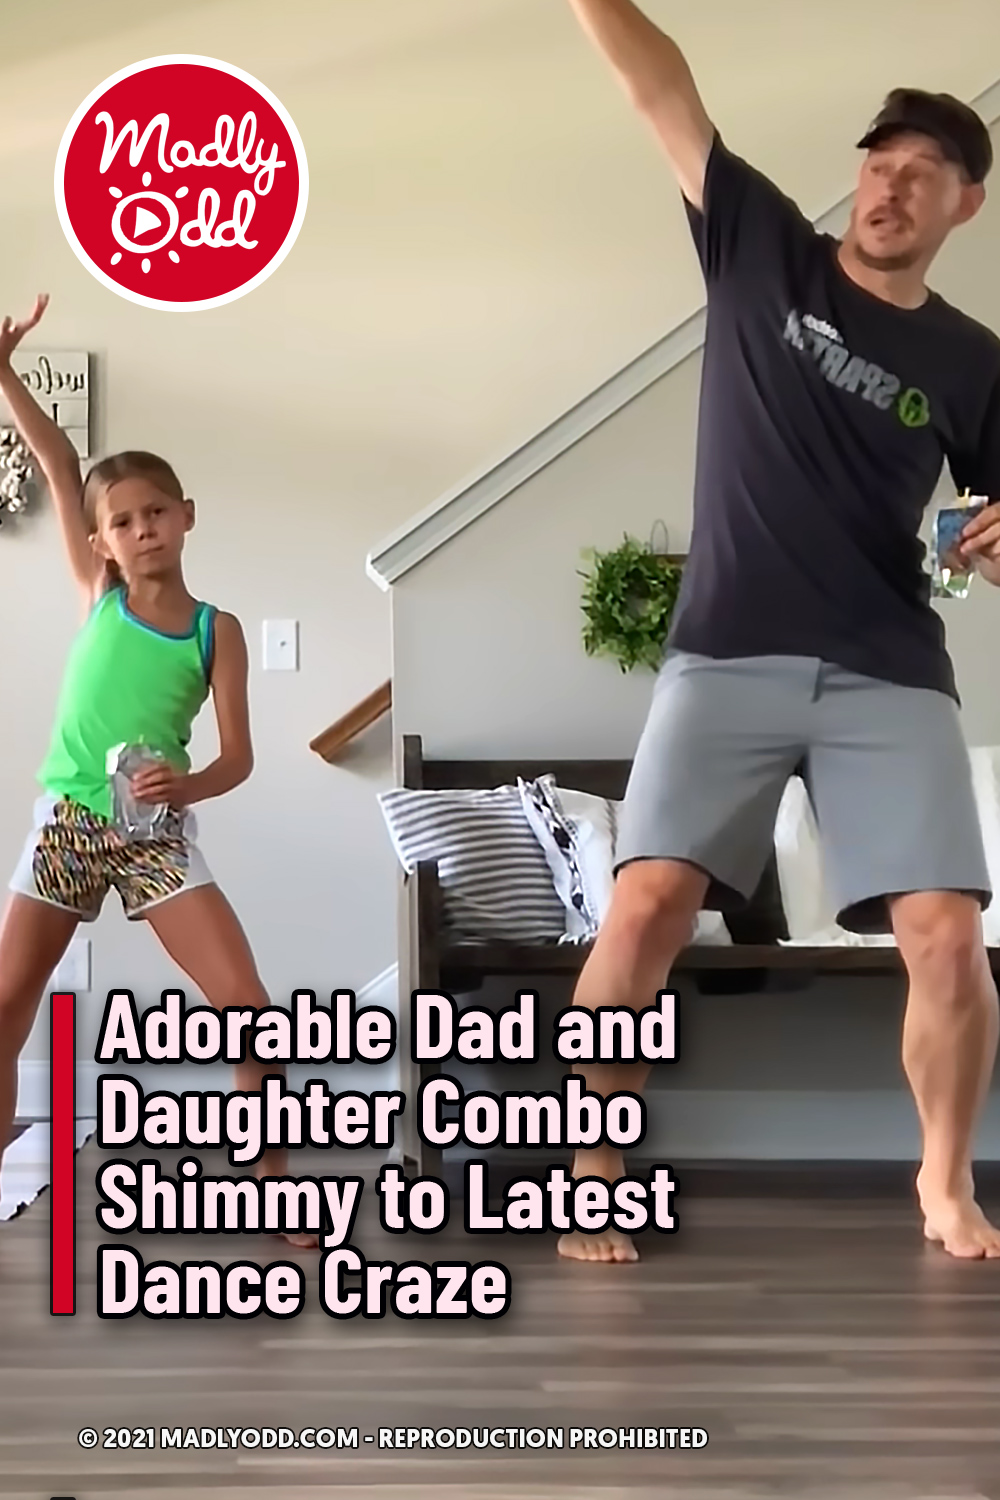 Adorable Dad and Daughter Combo Shimmy to Latest Dance Craze